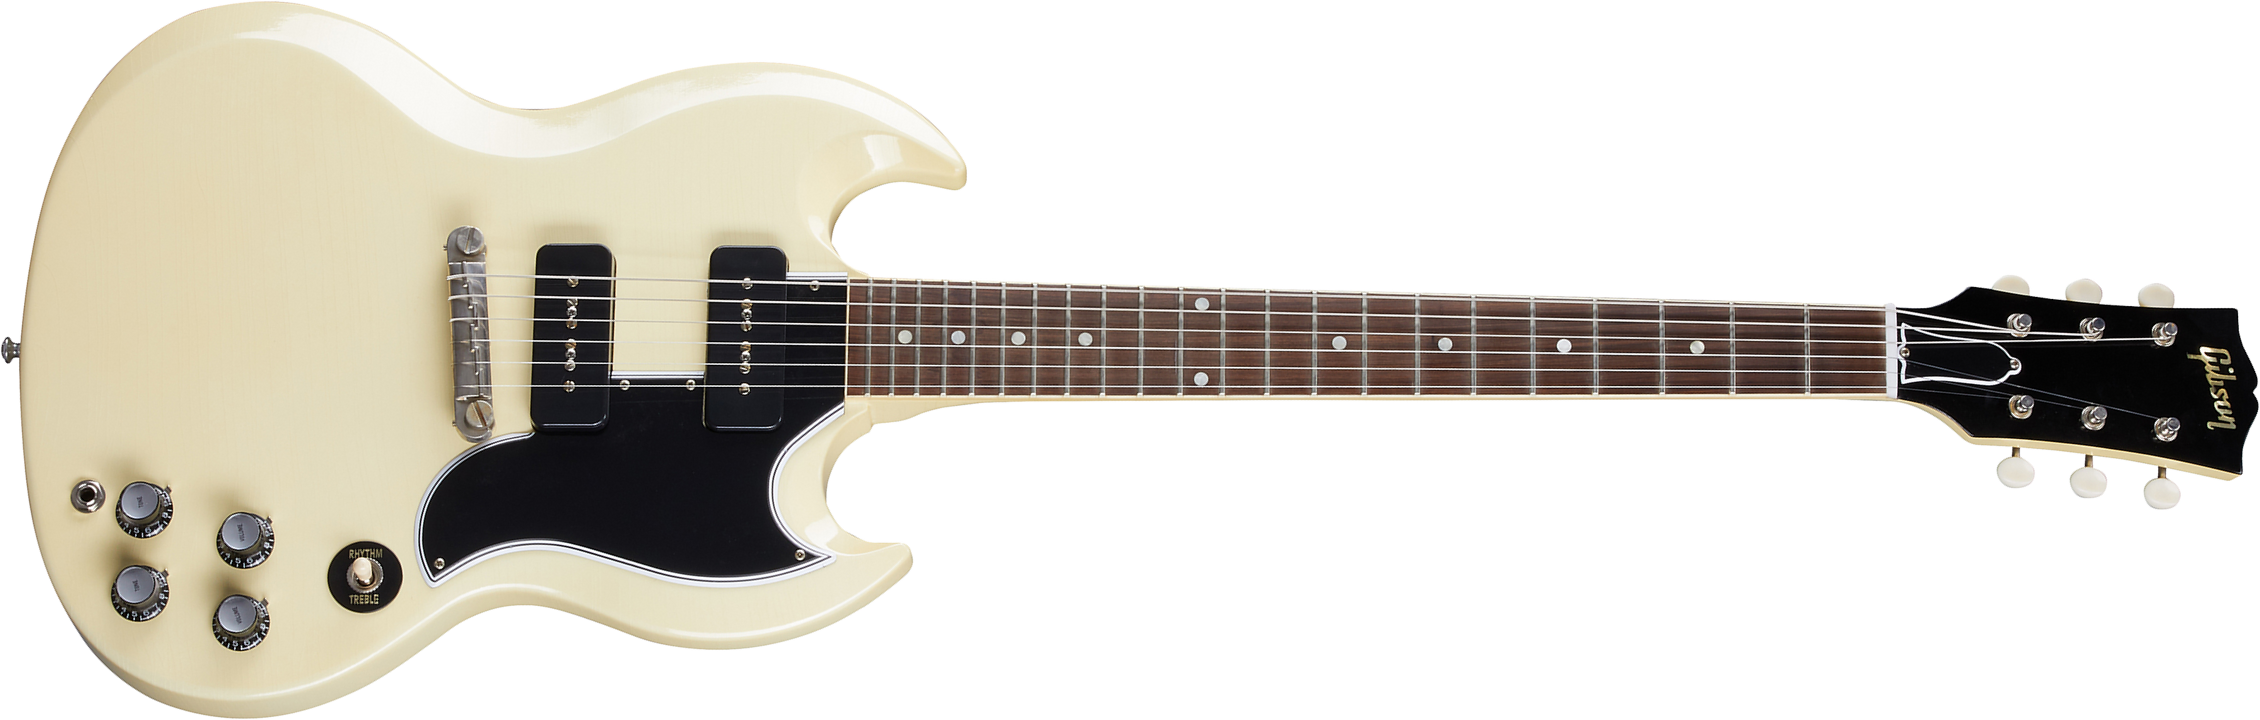 Gibson Custom Shop Murphy Lab Sg Special 1963 Reissue 2p90 Ht Rw - Ultra Light Aged Classic White - Double Cut E-Gitarre - Main picture